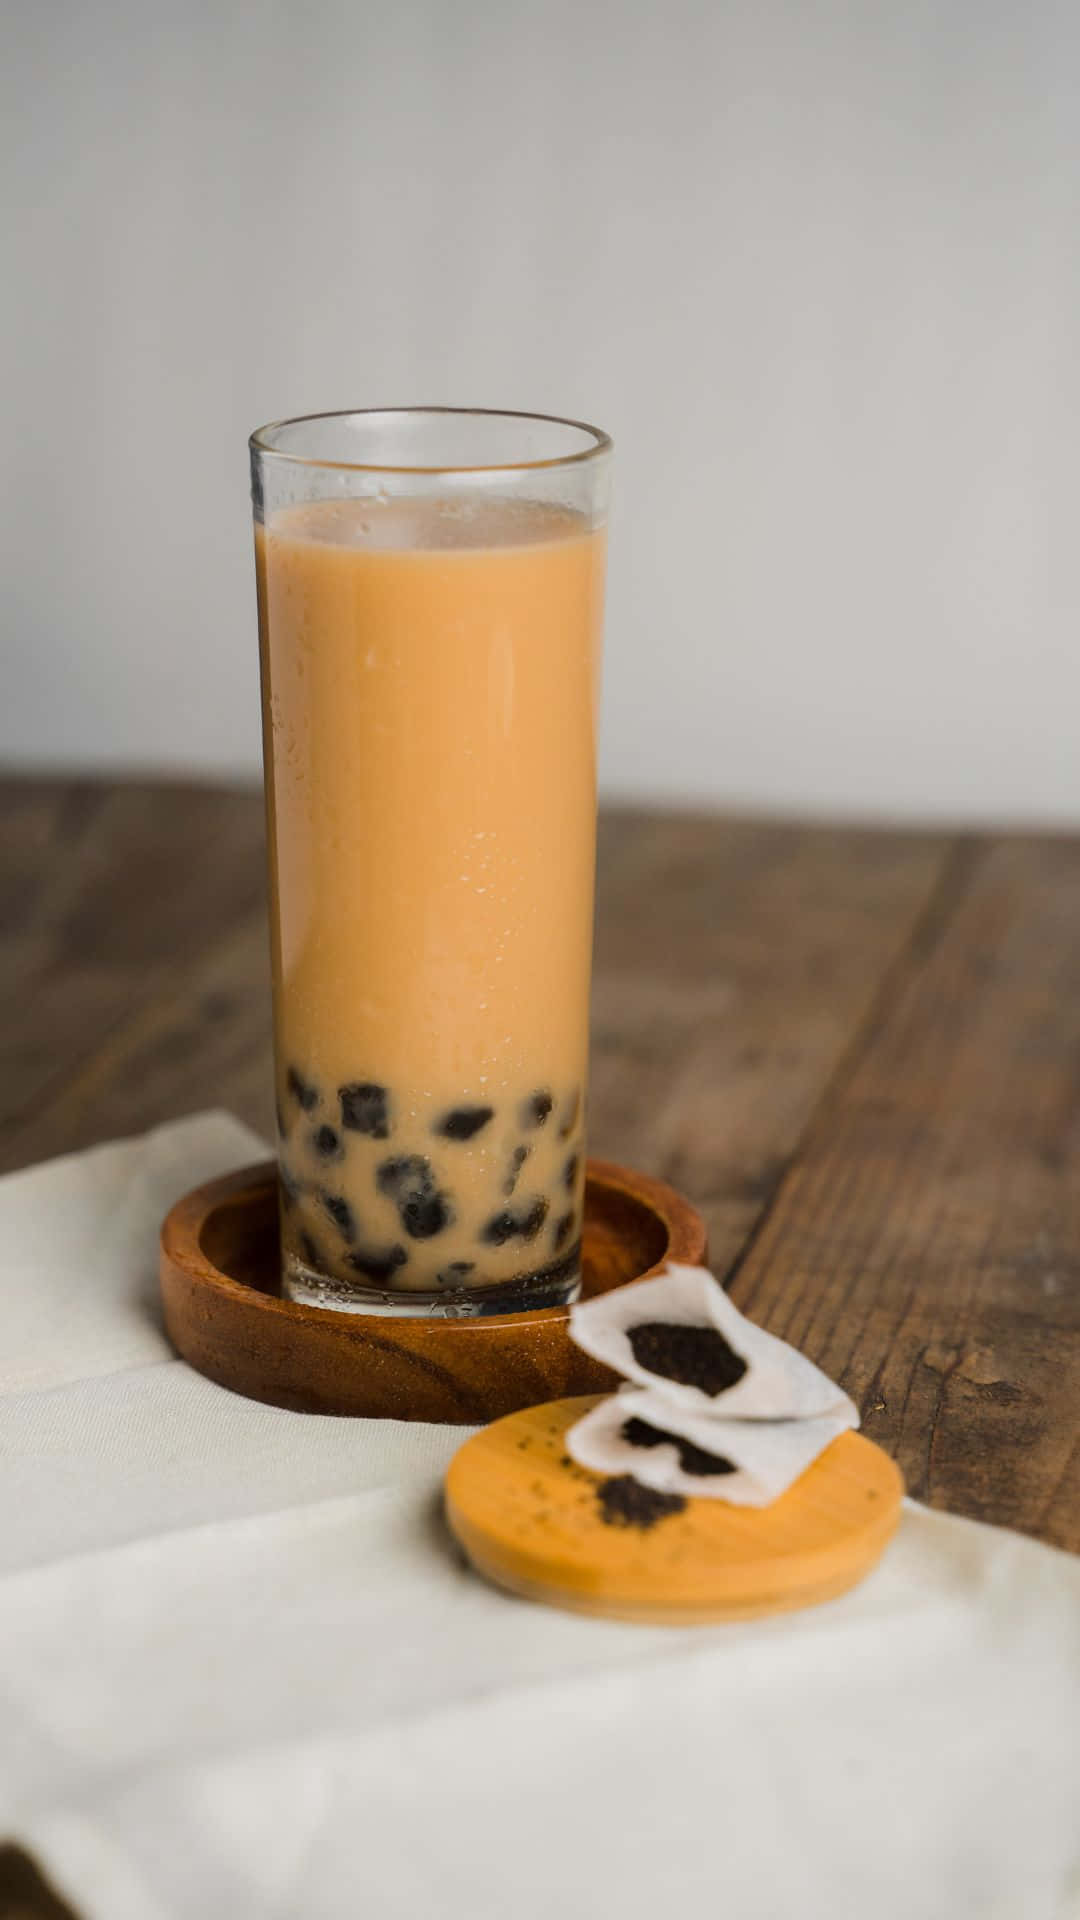 Boba Teawith Tapioca Pearlsand Cookie Wallpaper